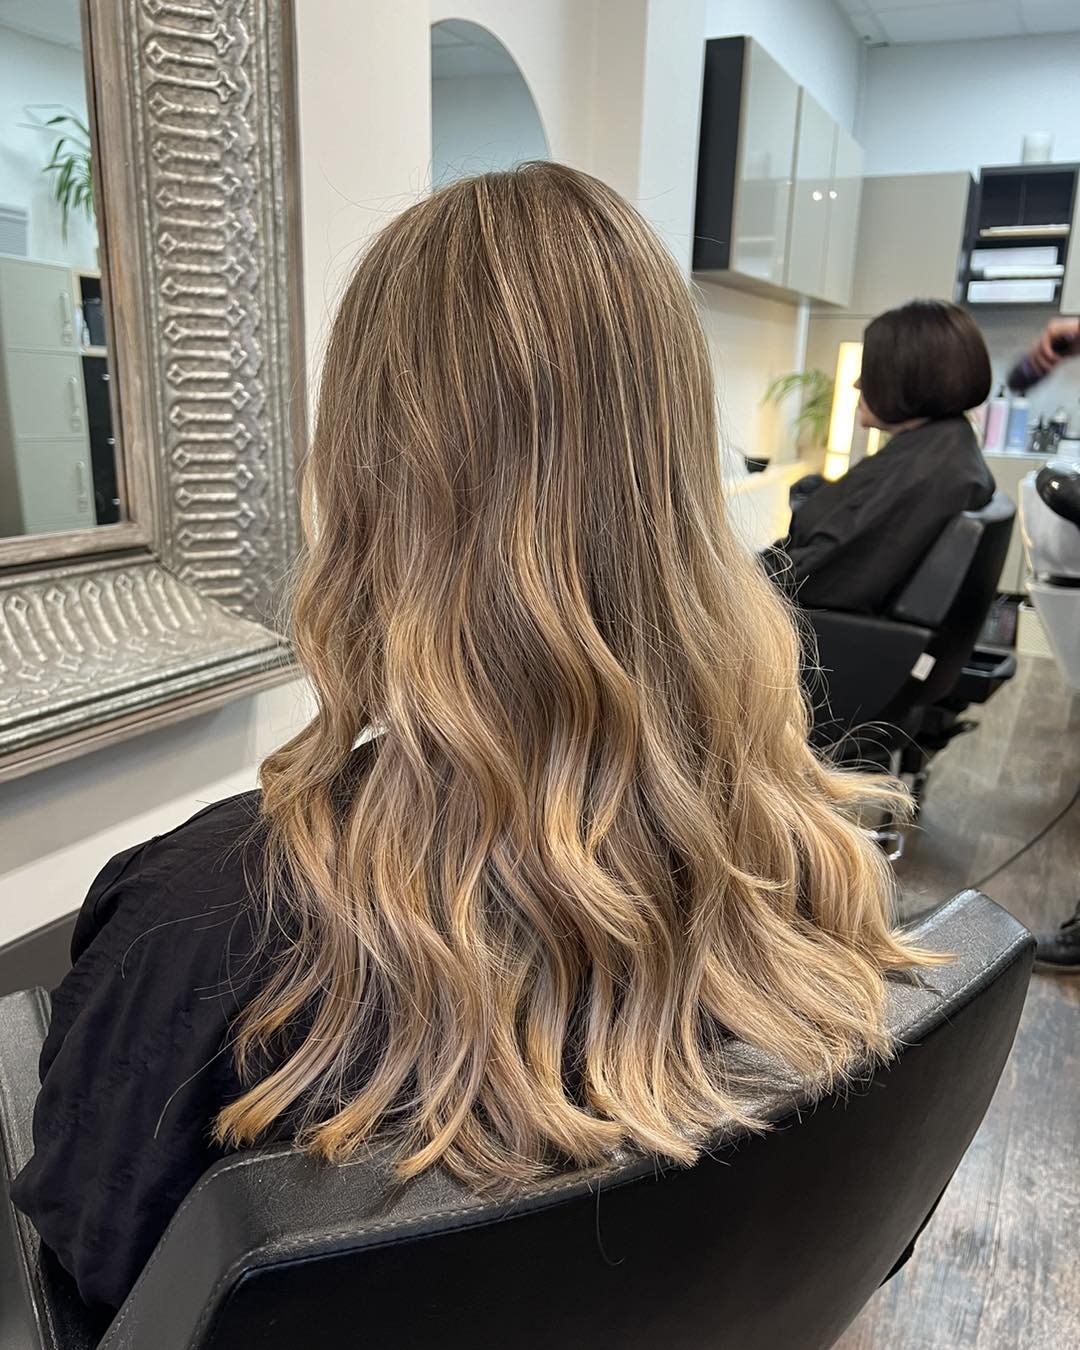 ✨ Gorgeous Waves Created with Foilage Technique ✨

The foilage technique involves carefully painting the hair with a combination of foils and balayage, resulting in soft, seamless highlights. This technique adds depth and dimension, enhancing the ove